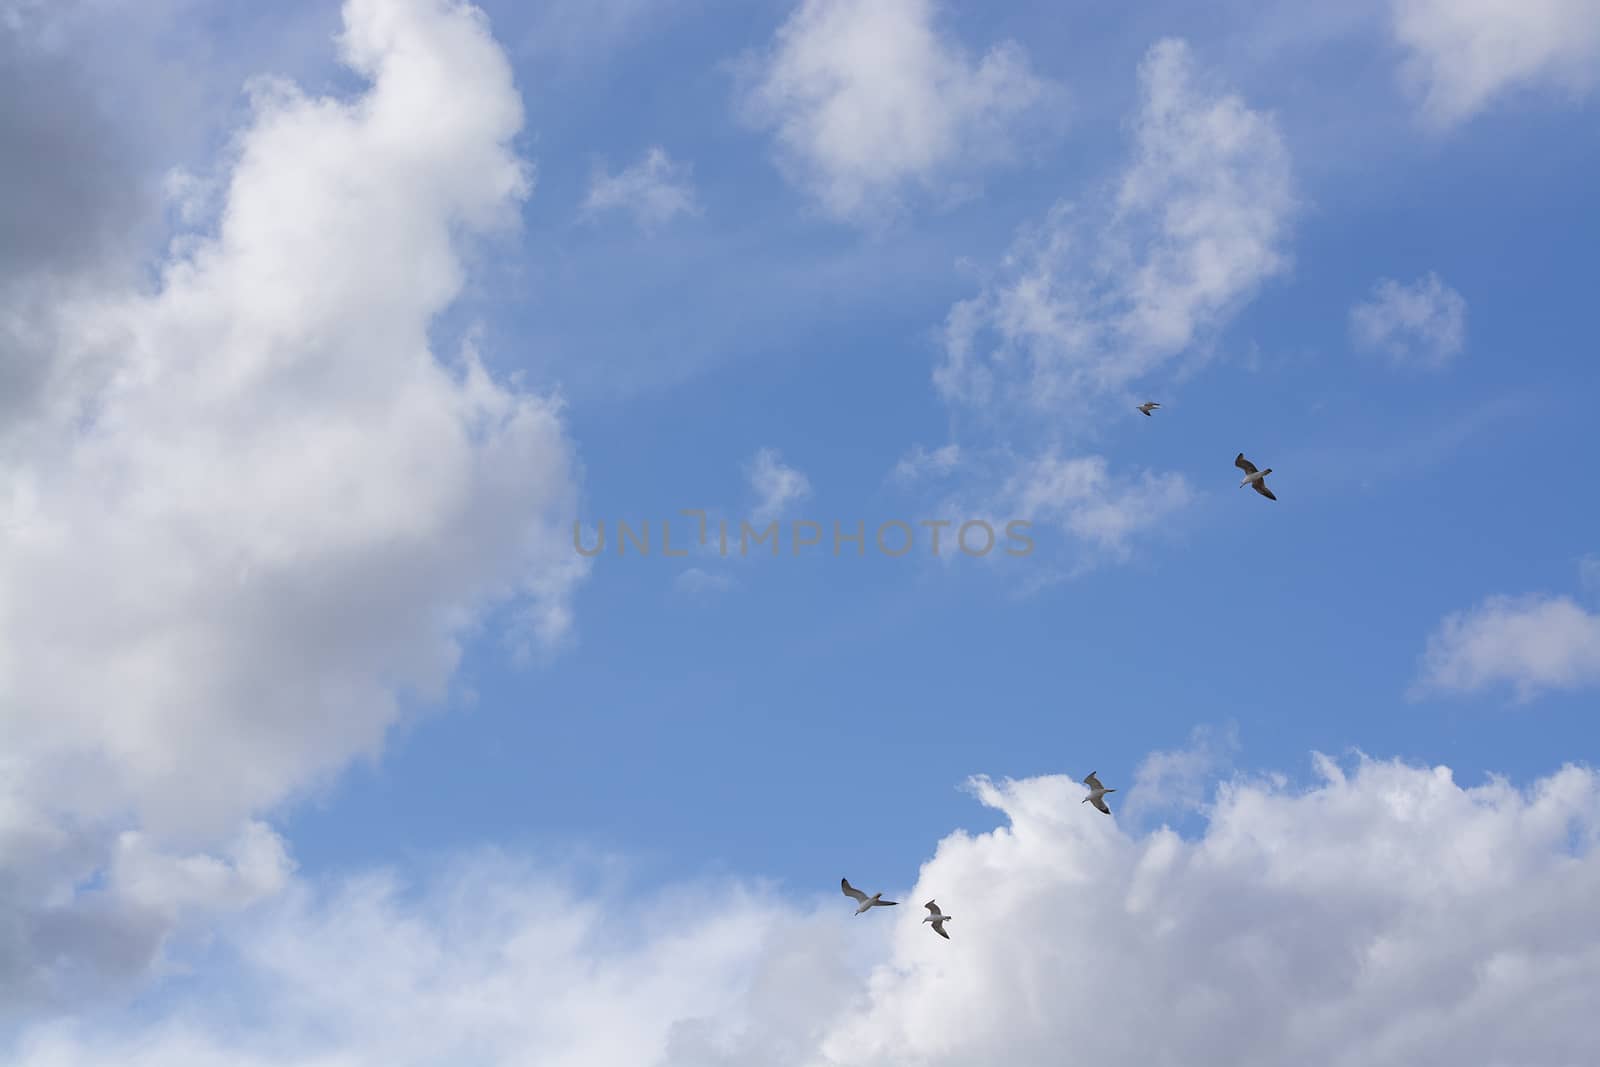 Seagulls flying overhead against cloudy and blue skies in Mallorca, Spain.